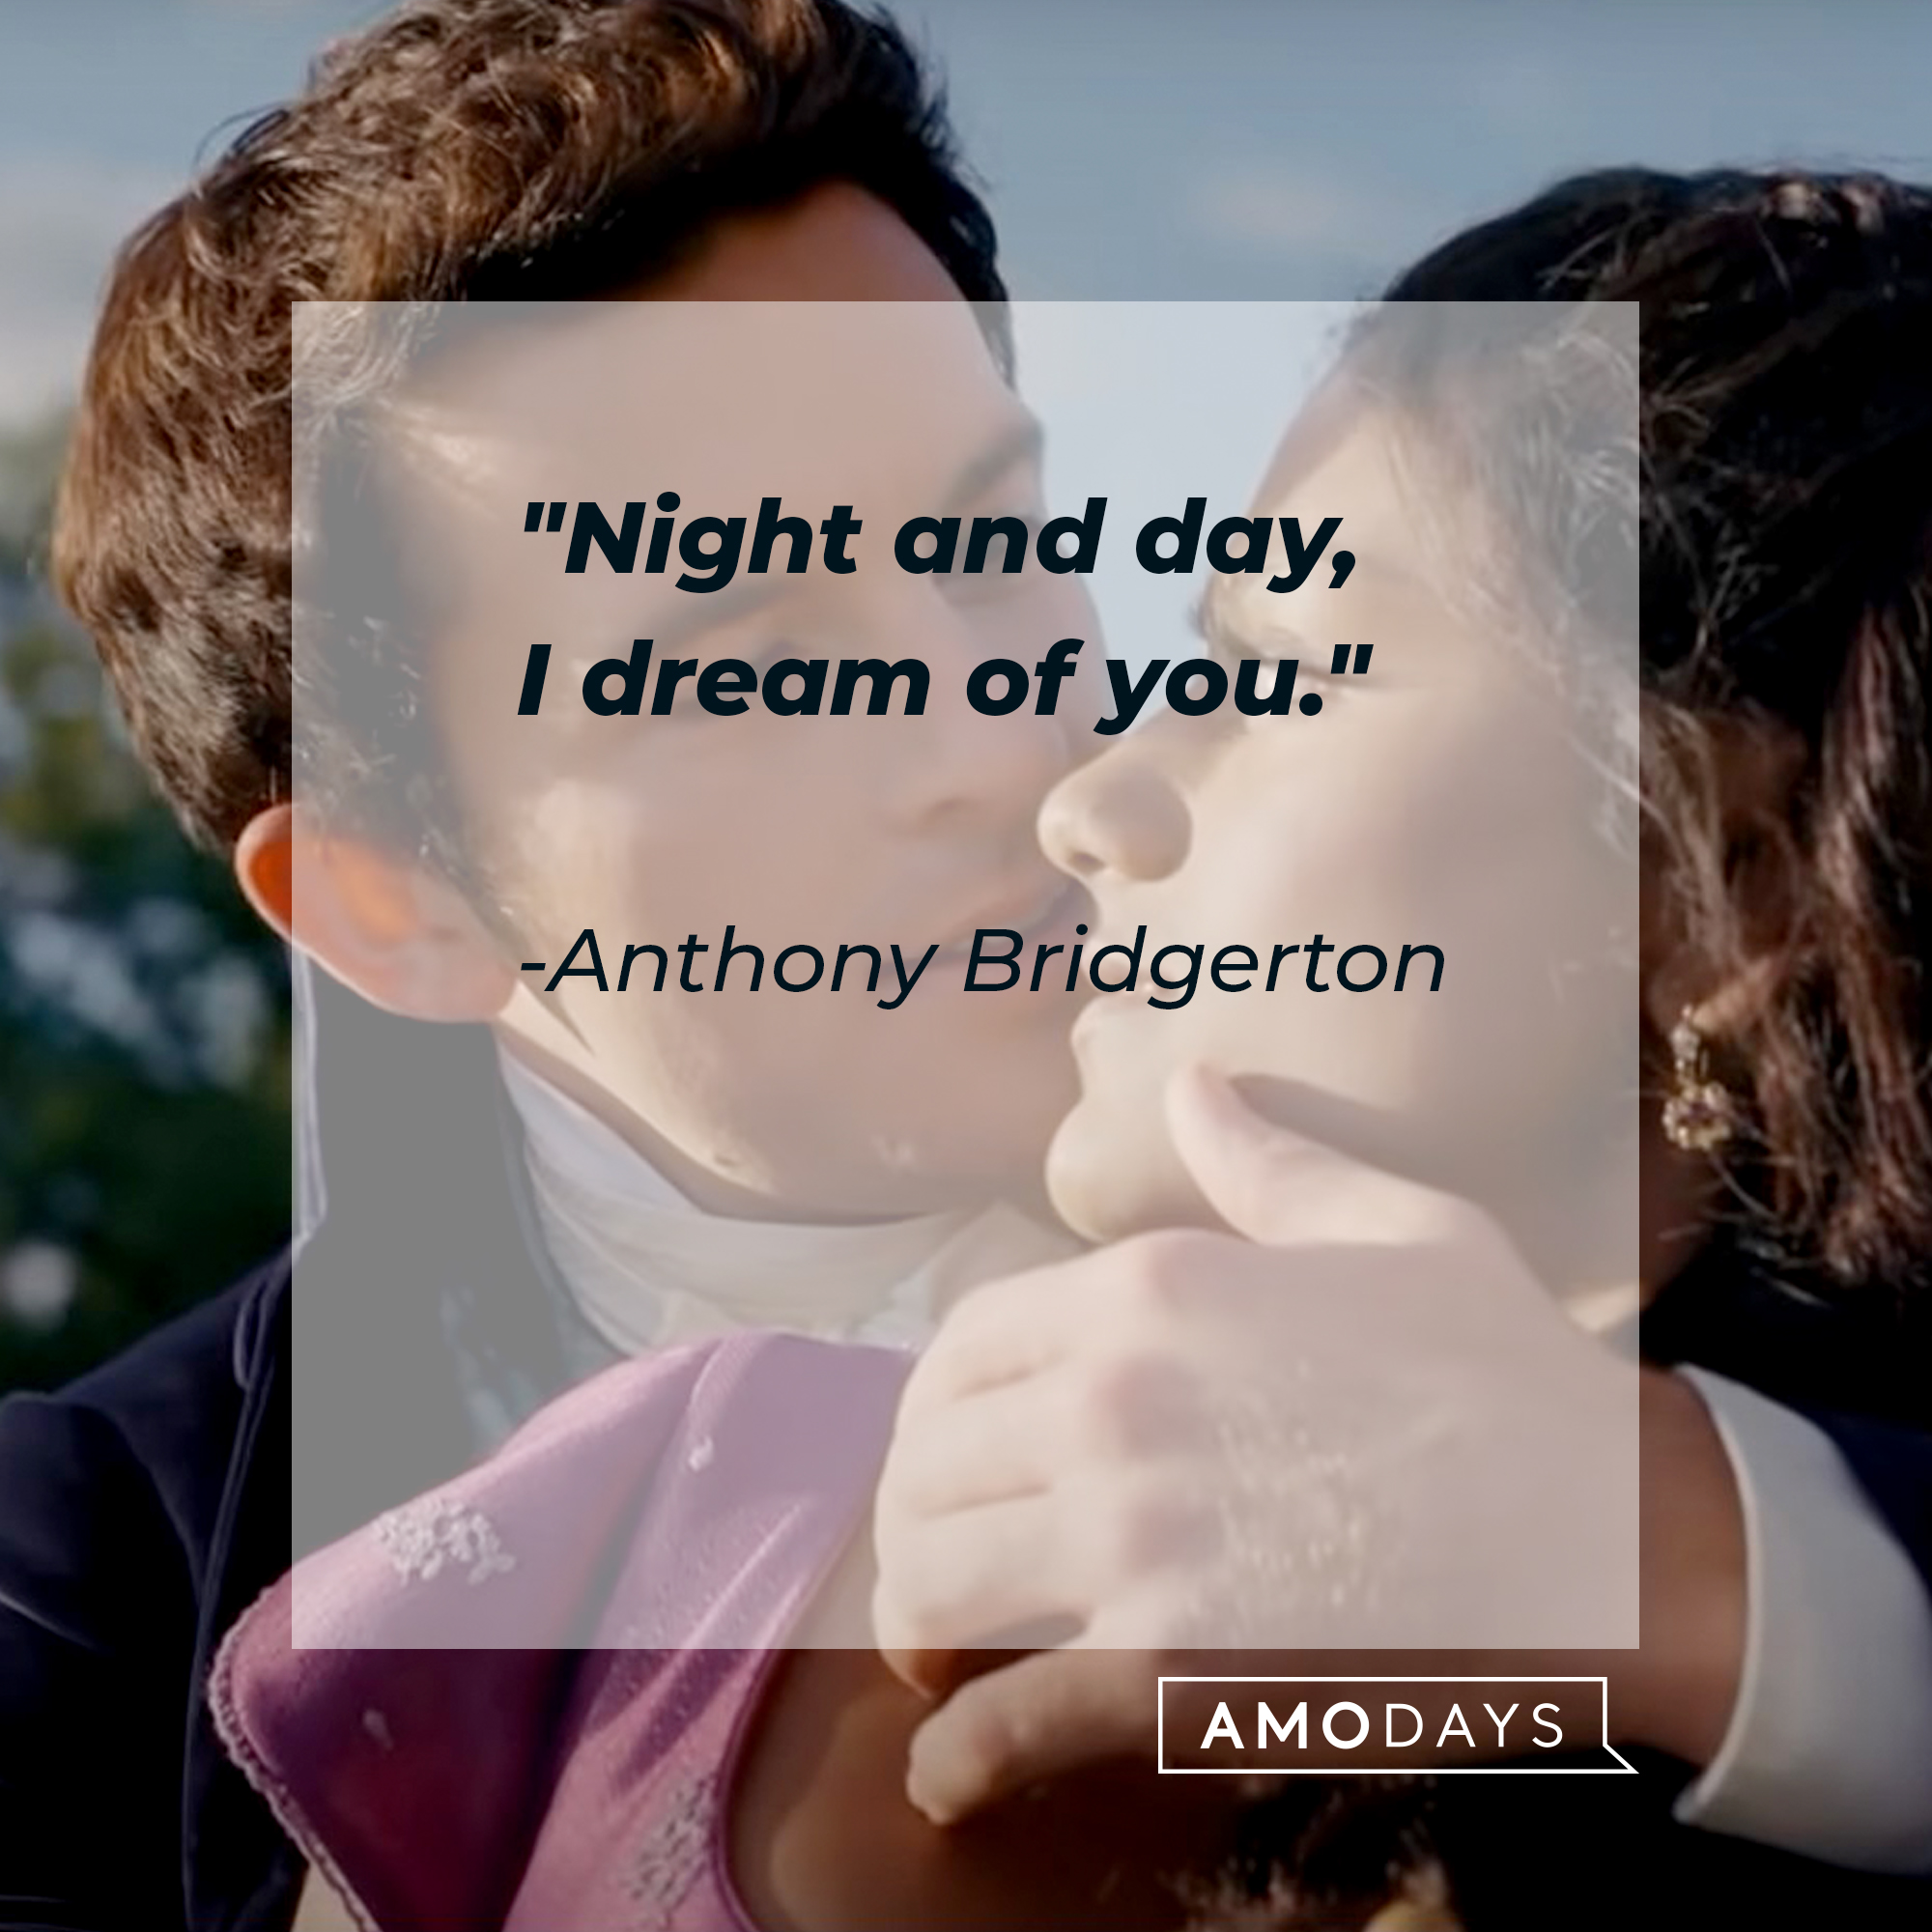 An image of Anthony Bridgerton and Kate Sharma with his quote: “Night and day, I dream of you.”│ youtube.com/Netflix